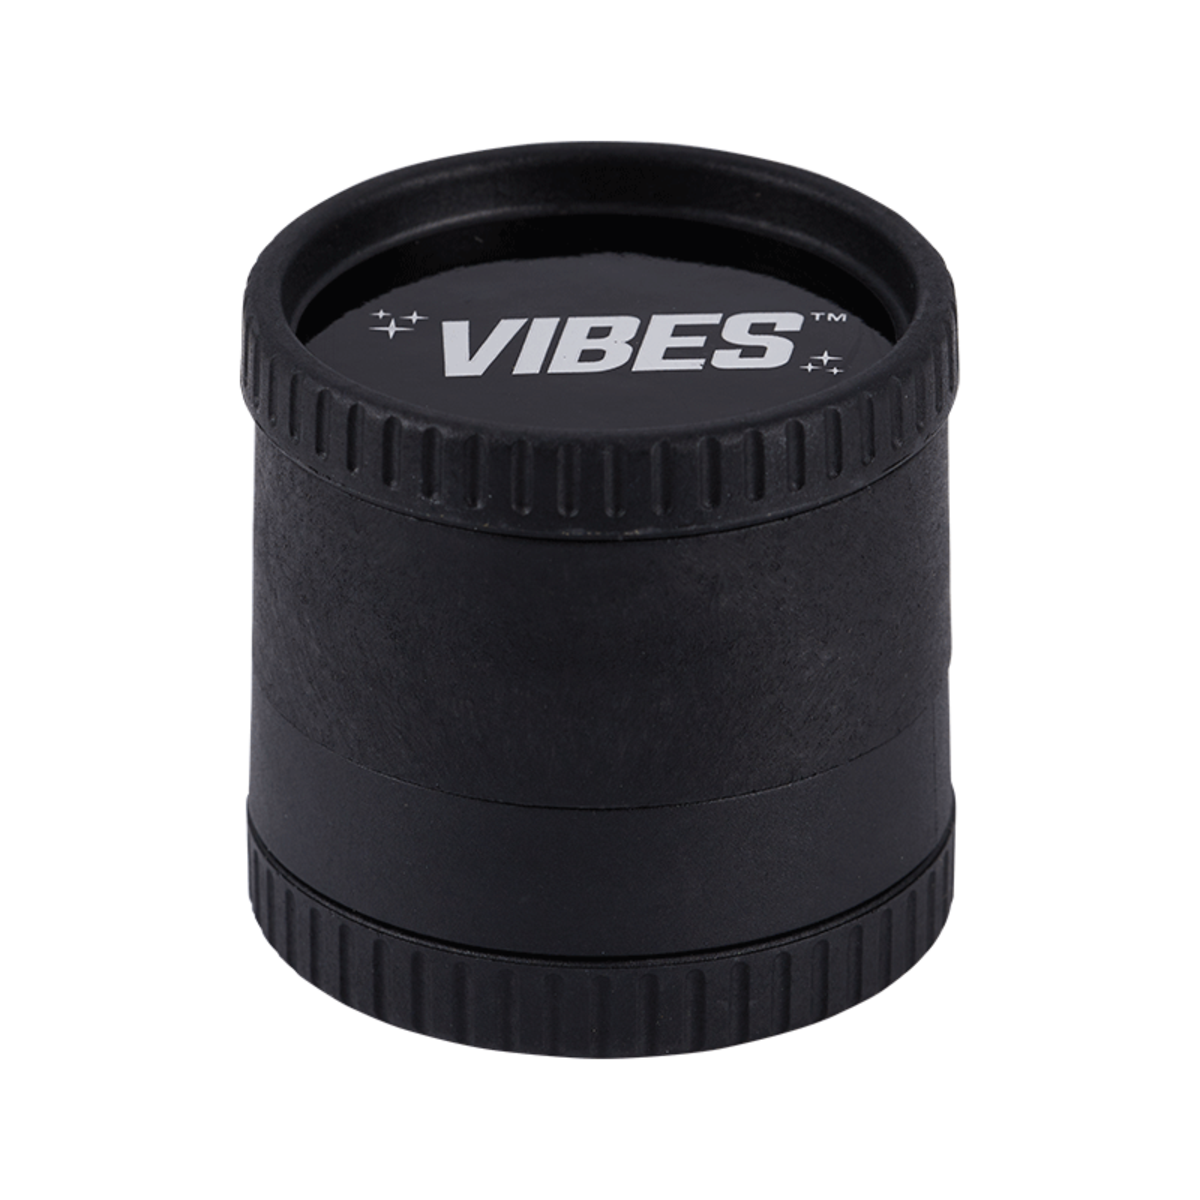 Vibes X Santa Cruz Shredder 4-Piece Hemp Grinder Black. The Vibes™ X Santa Cruz Shredder 4-Piece Hemp Grinder is a Biodegradable Grinder Made From 100% Natural Hemp. This Durable Grinder Sports a Patented-Tooth Design that Delivers a Remarkably Even and Fluffy Grind. MOST DIVERSE CBD CONCENTRATE COLLECTION ON THE WEB. Top Shelf CBD Hemp Flower. Dab, Vape, Smoke Accessories - Sauce Warehouse